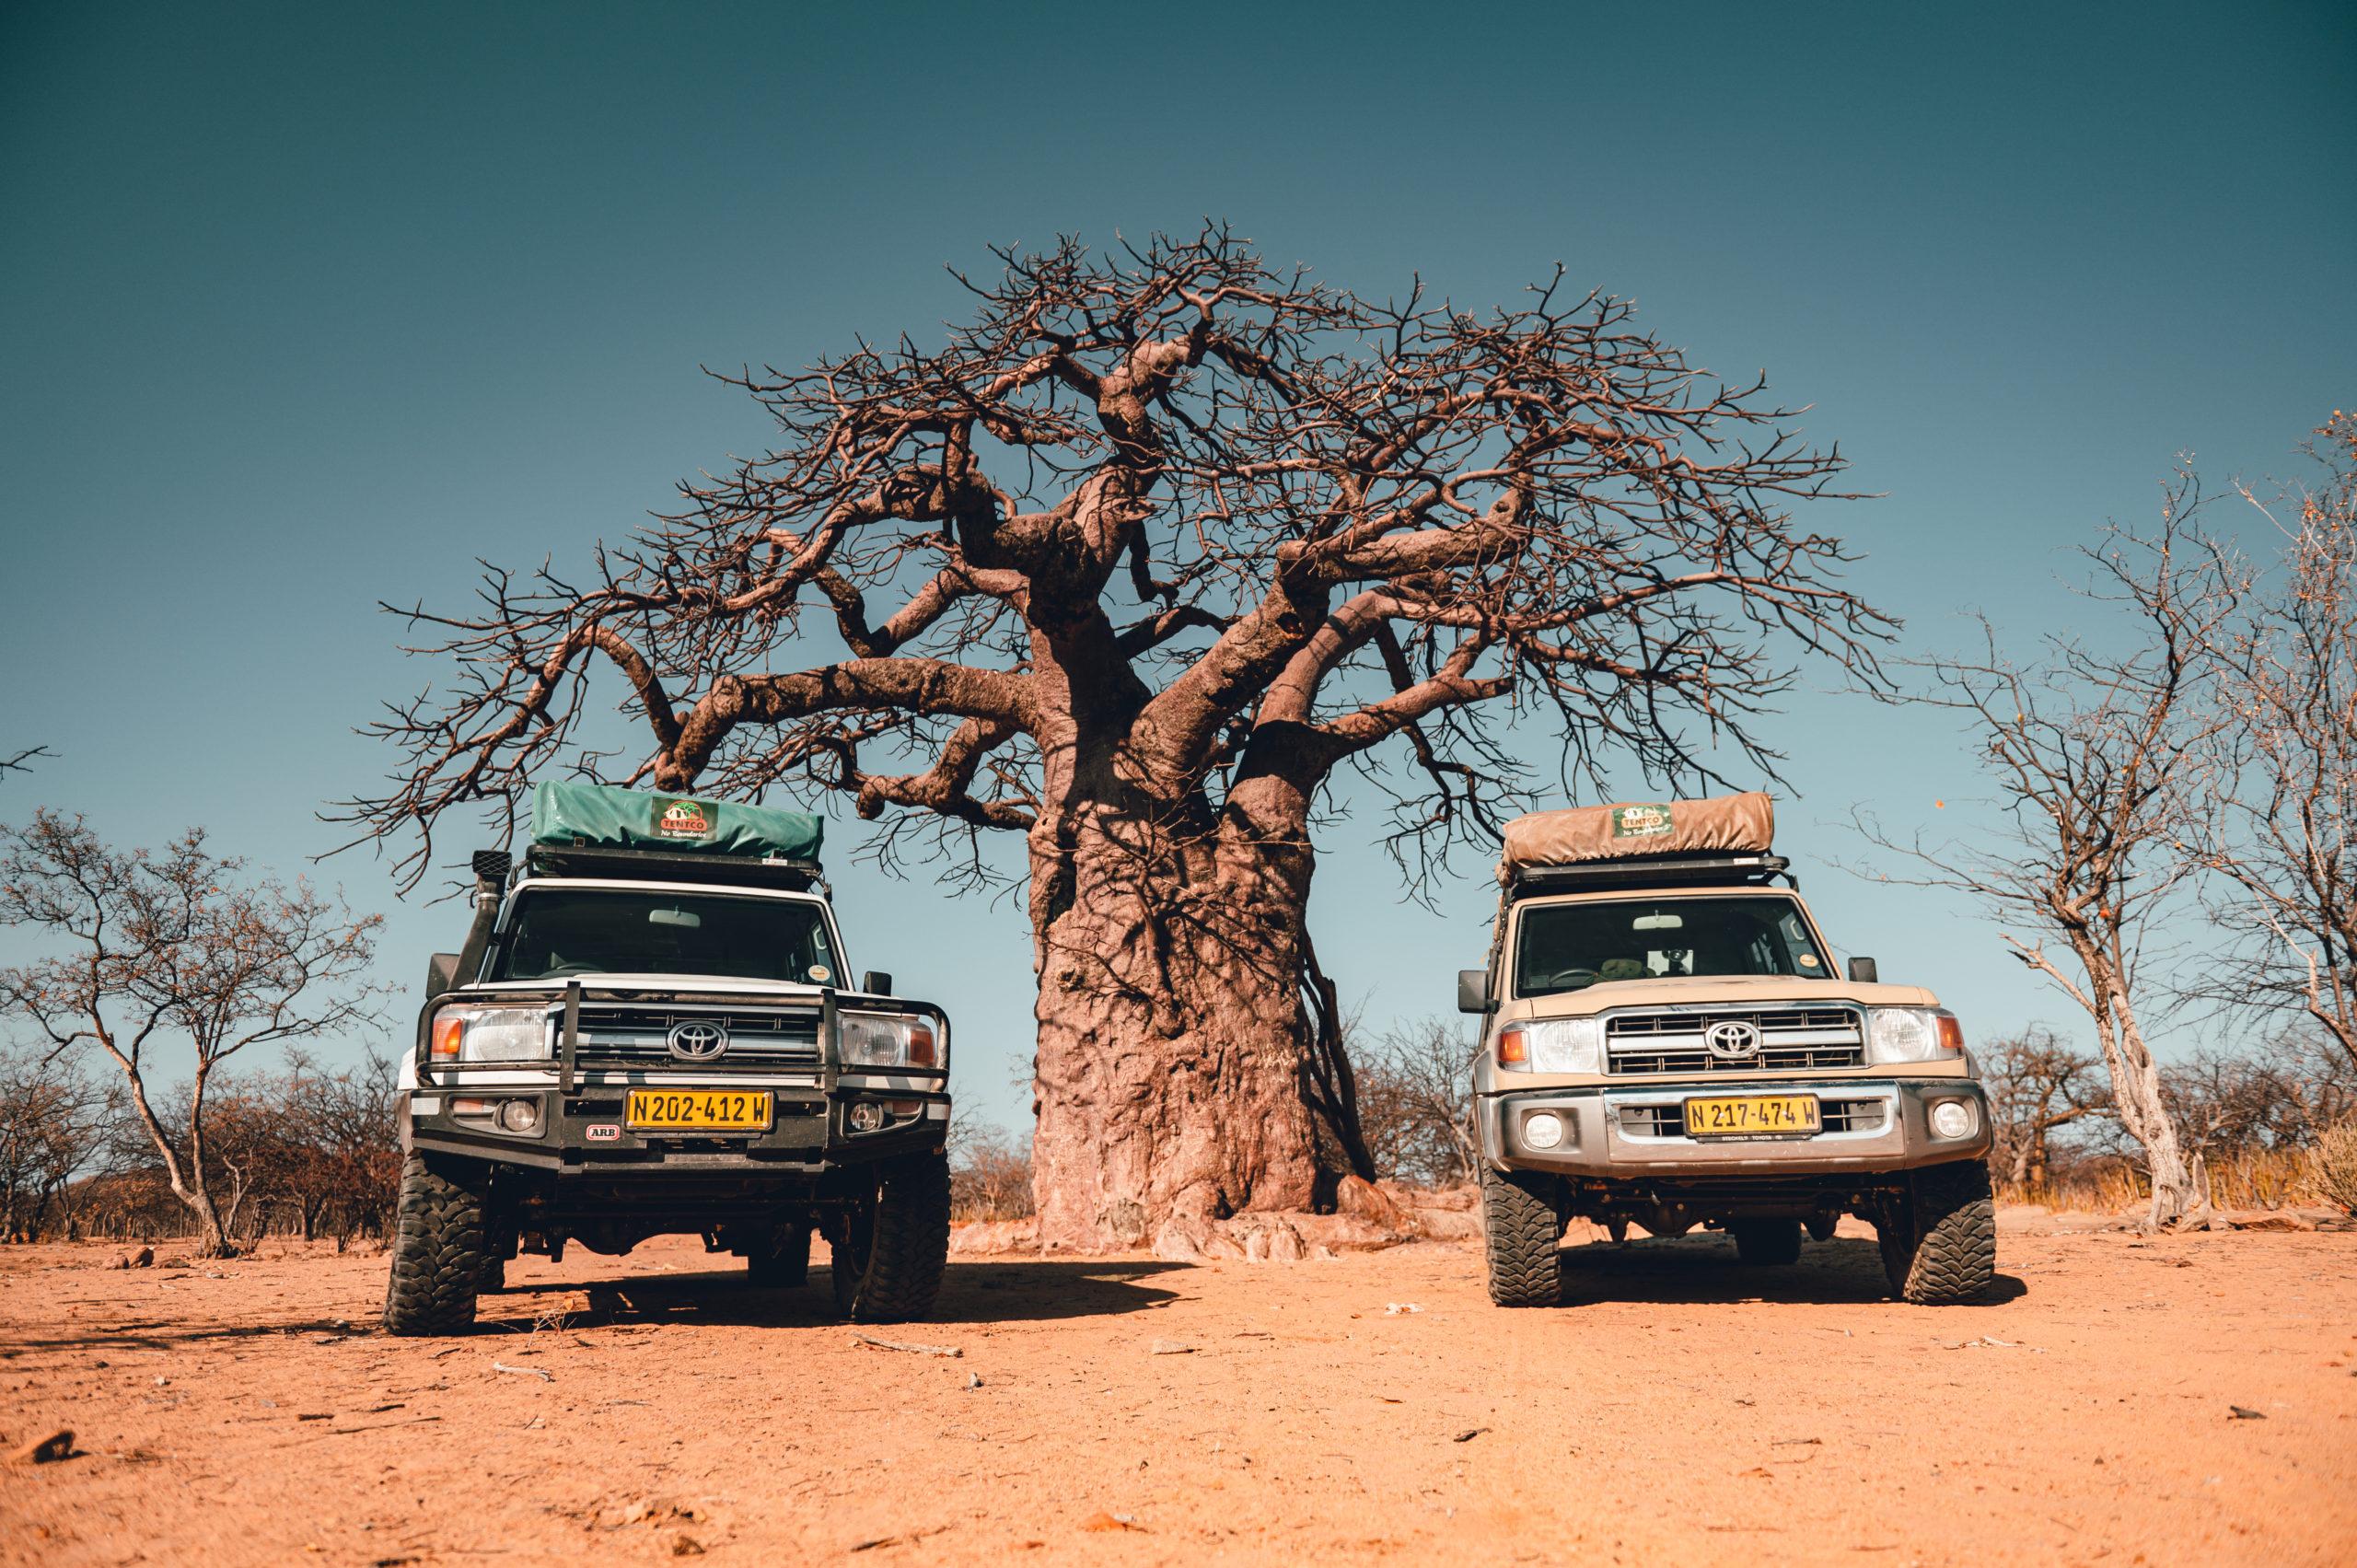 landcruiser-in-front-of-baobab-tree-photo-by-matej-smucr-scaled